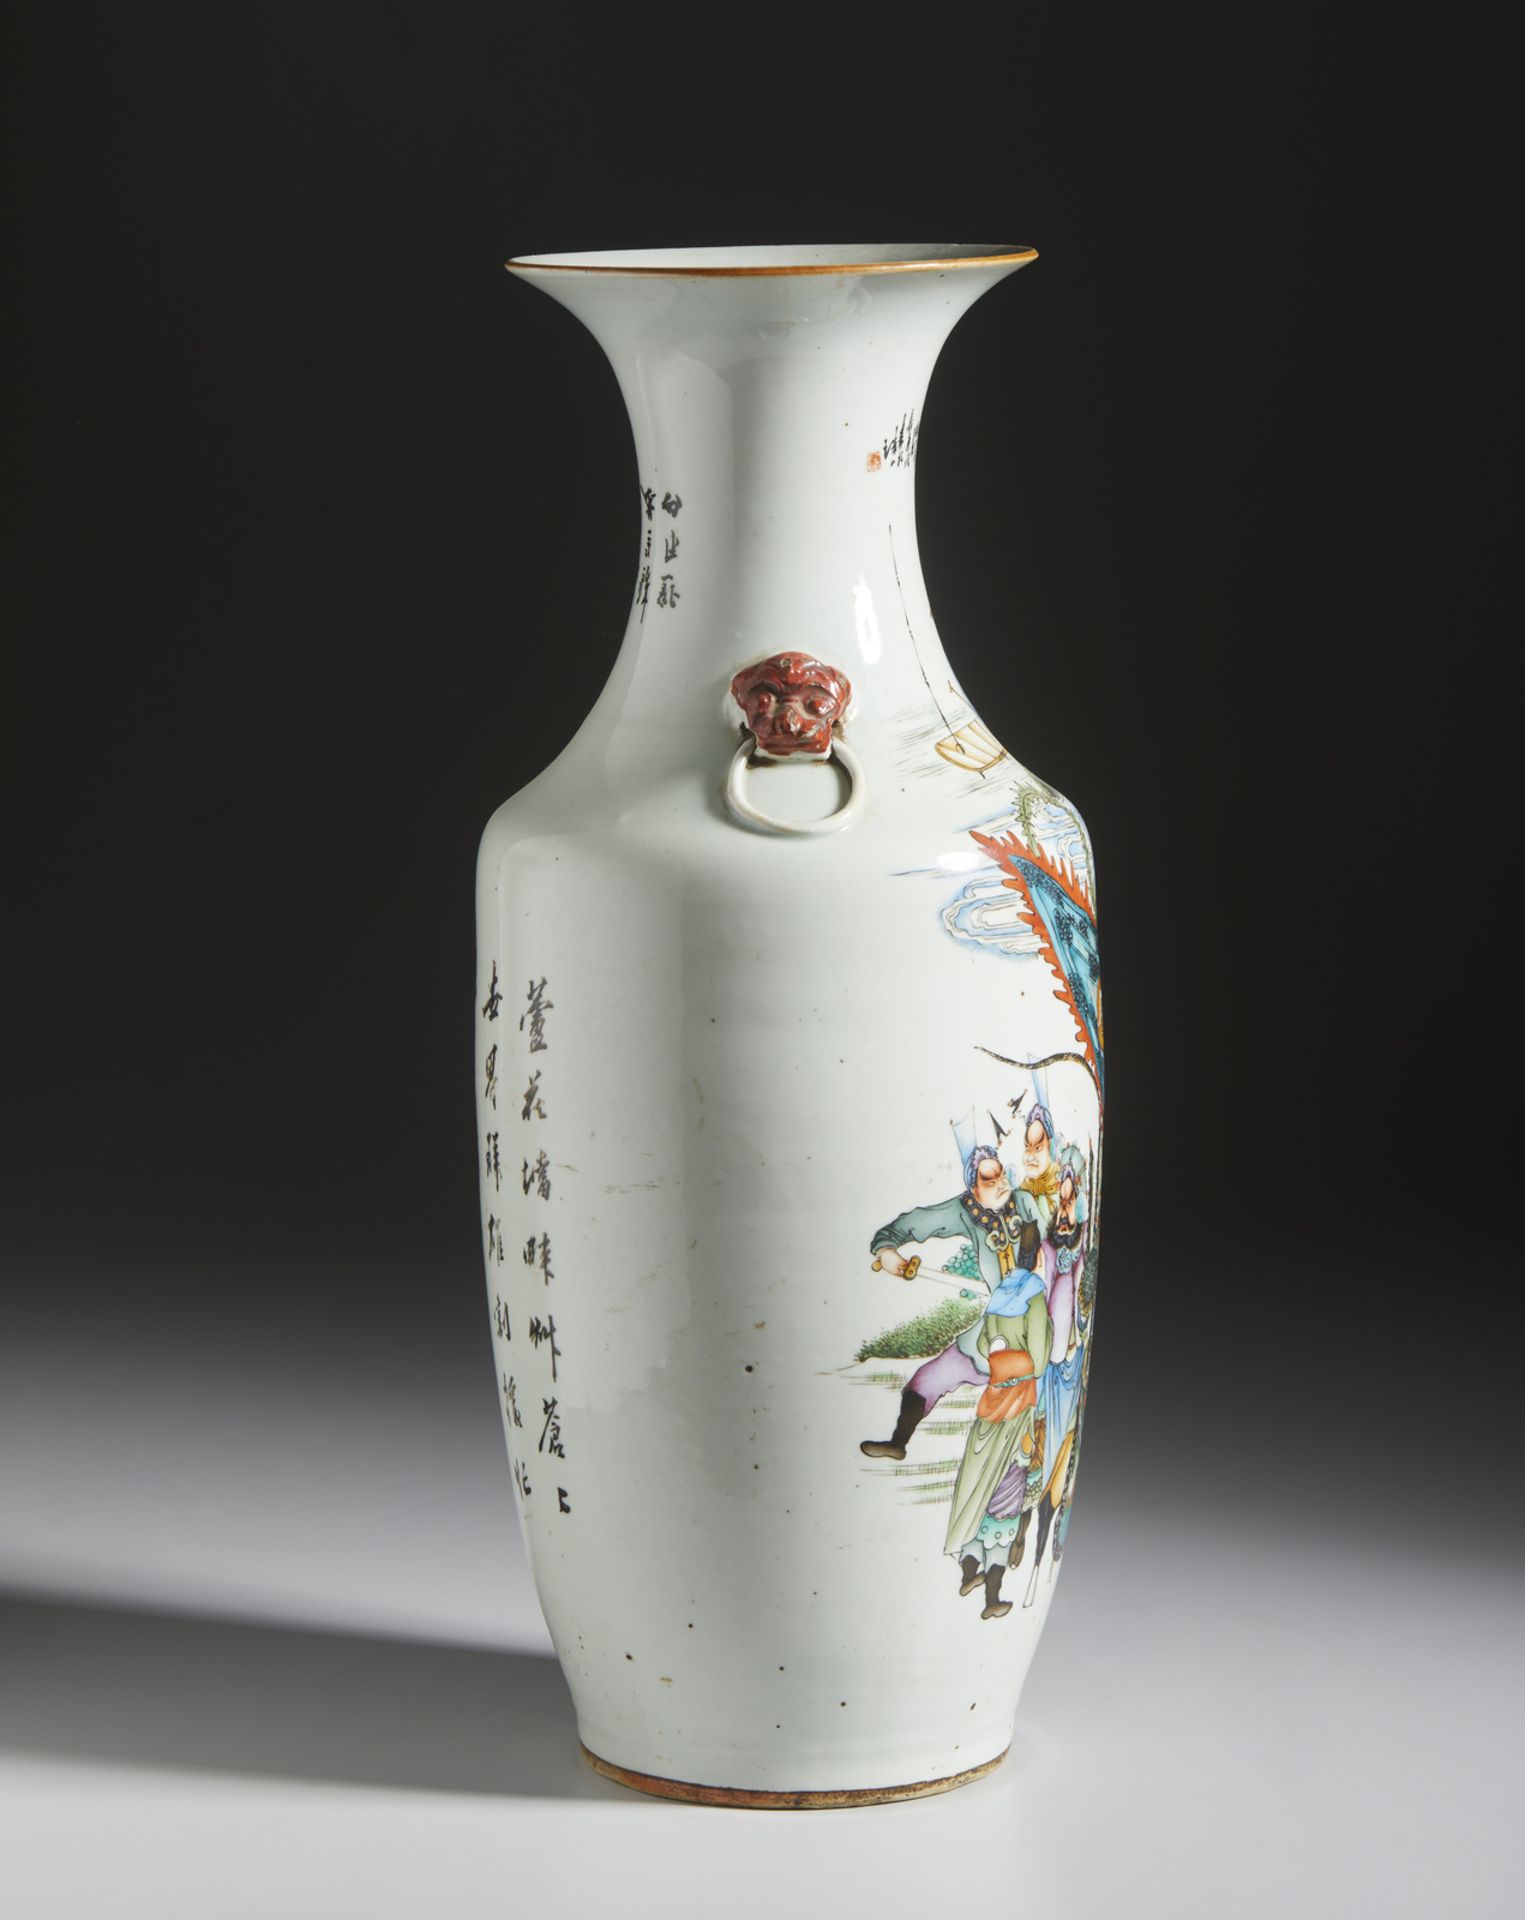 A porcelain baluster vase painted with mythological scene China, Republic period, early 20th century - Image 2 of 4